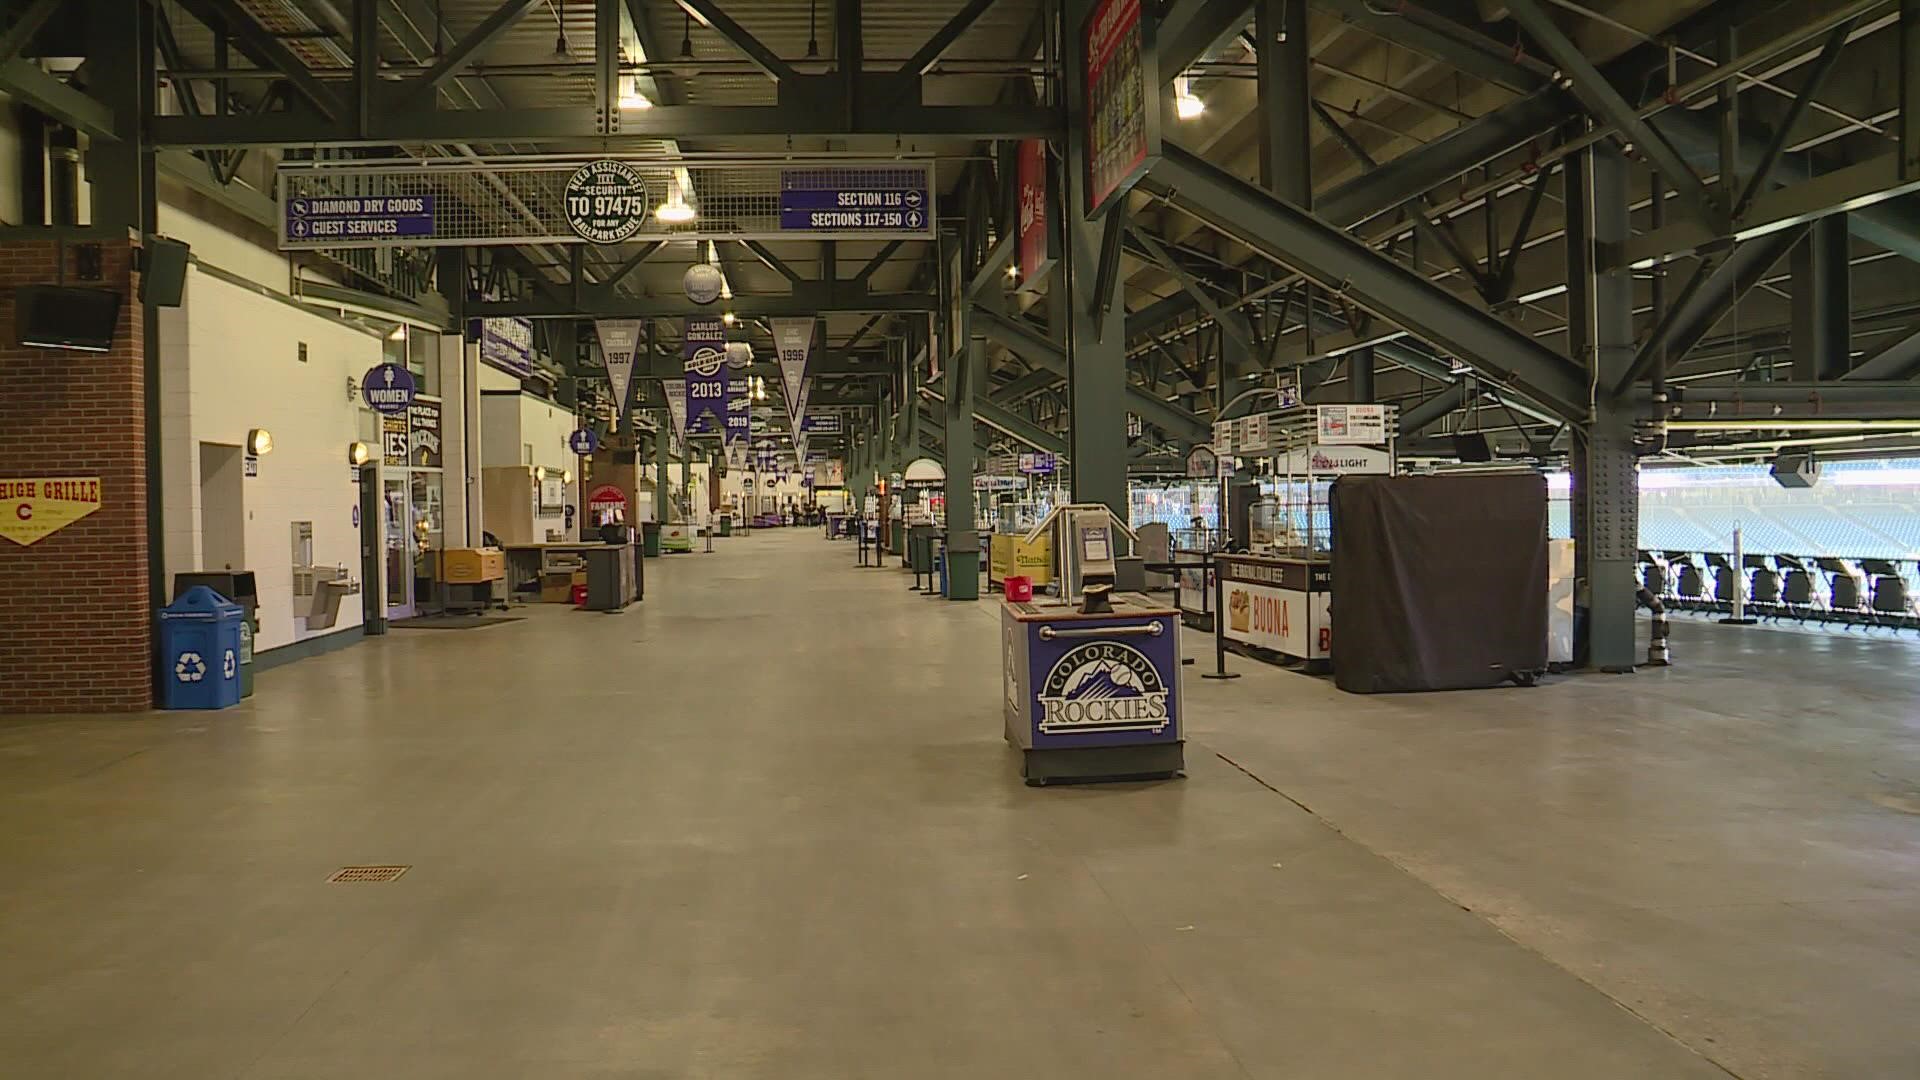 A staff of 700 will be ready for Opening Day at Coors Field, but more workers are needed for the rest of the baseball season.